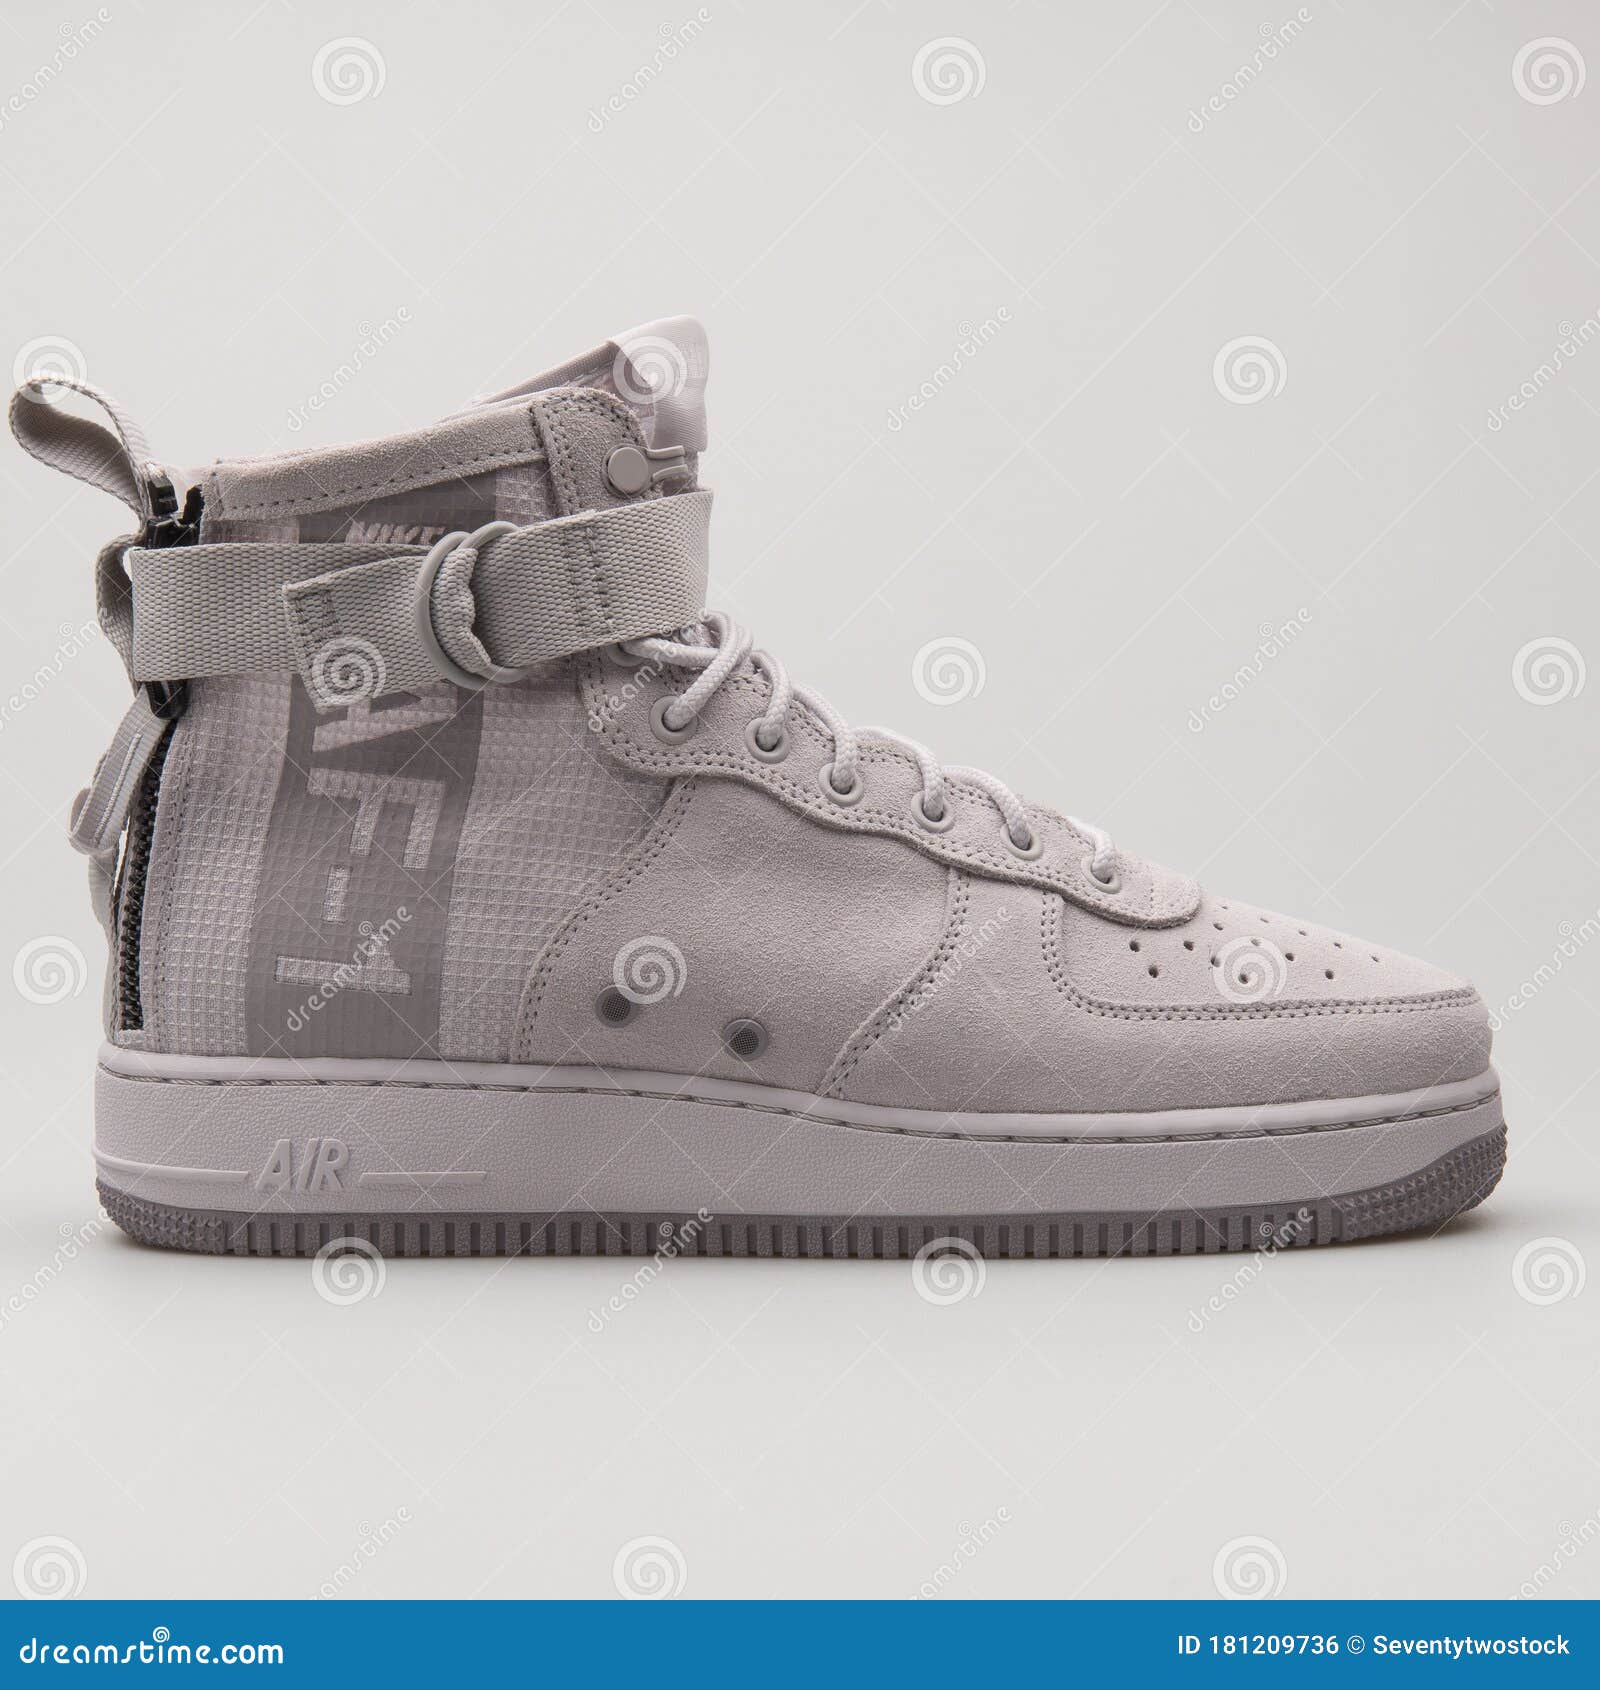 Nike SF Air Force 1 Mid Grey Sneaker Editorial Photo - Image of running, color: 181209736